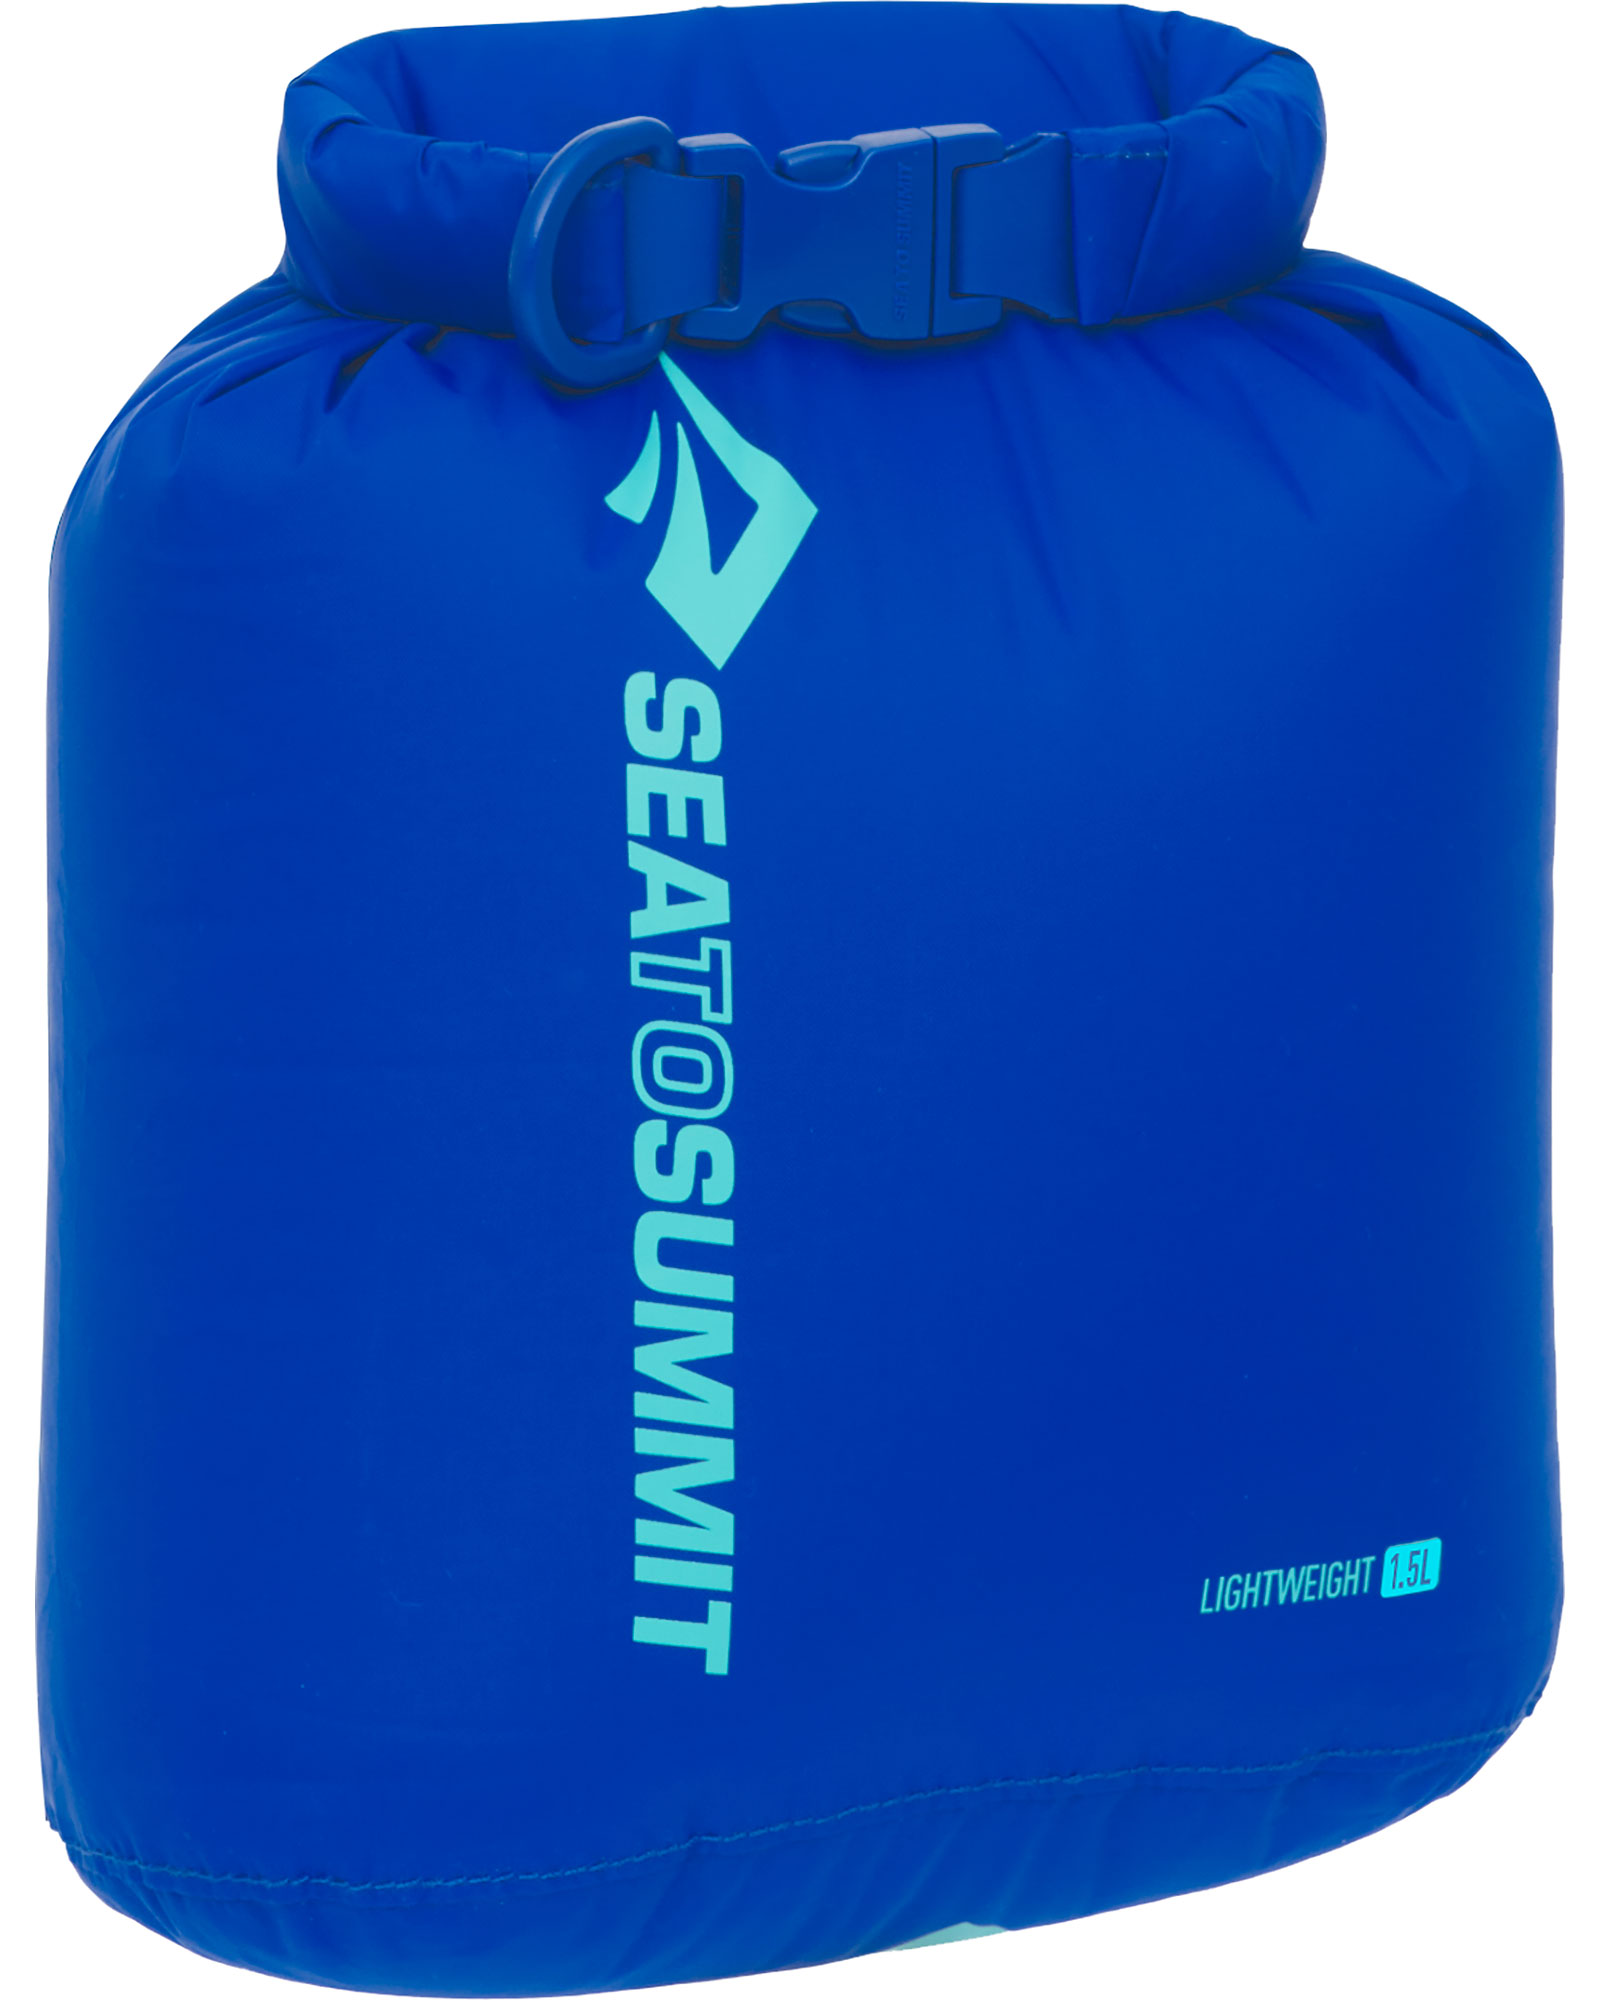 Sea To Summit Lightweight Dry Bag 1.5l Dry Bags